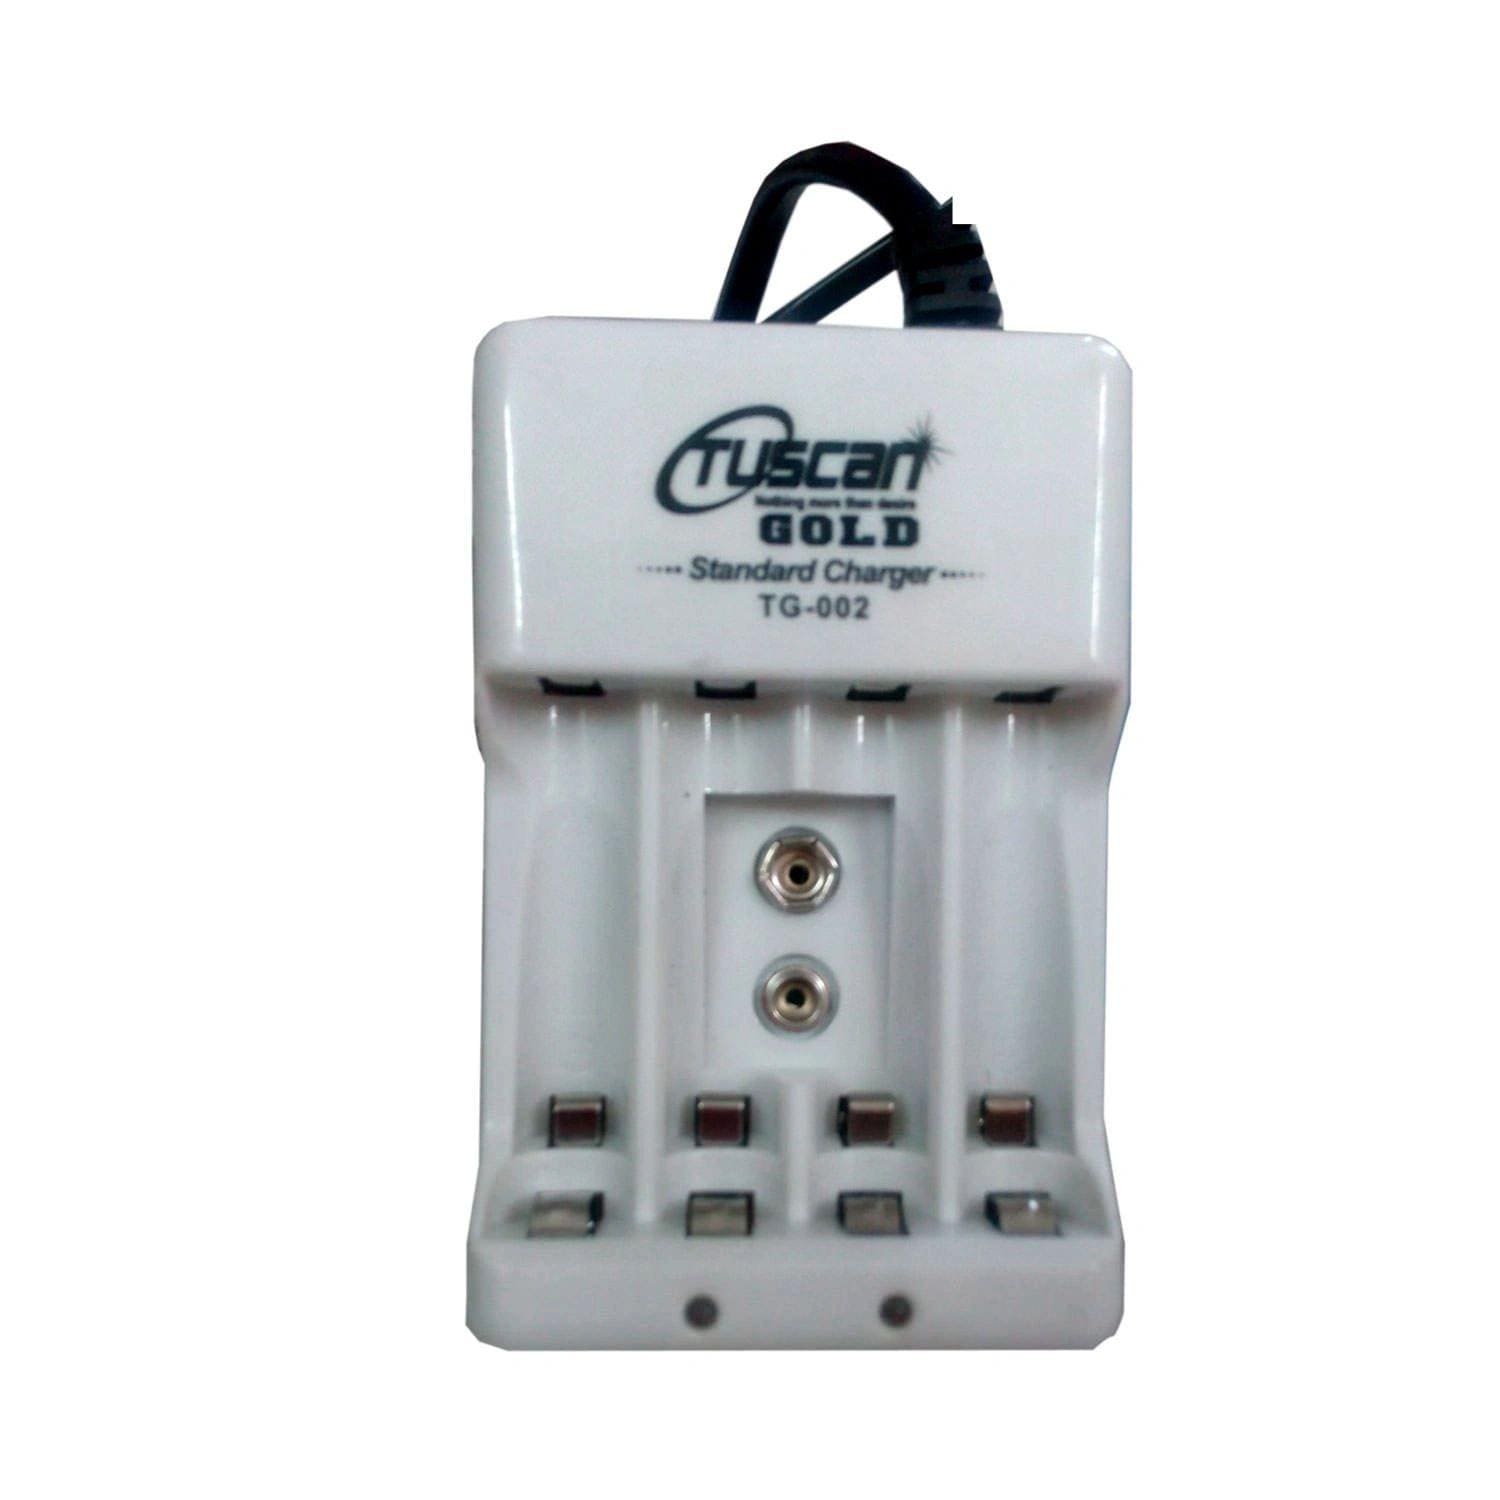 Tuscan Gold Battery Charger for AA, AAA and 9V Batteries TG-002-Rechargeable Batteries-dealsplant